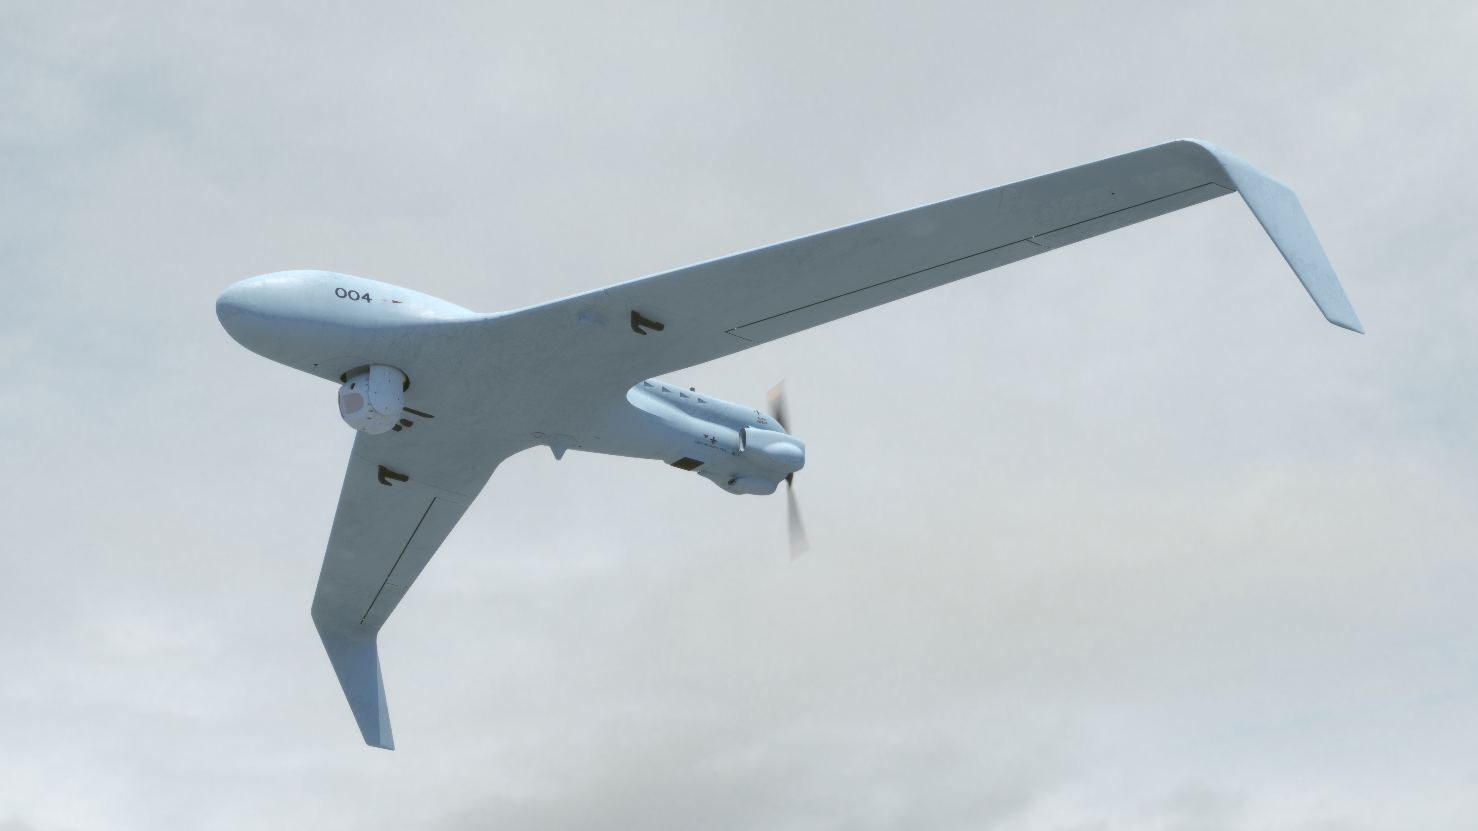 Paris Air Show 2019: Elbit Systems will introduce Hermes 45